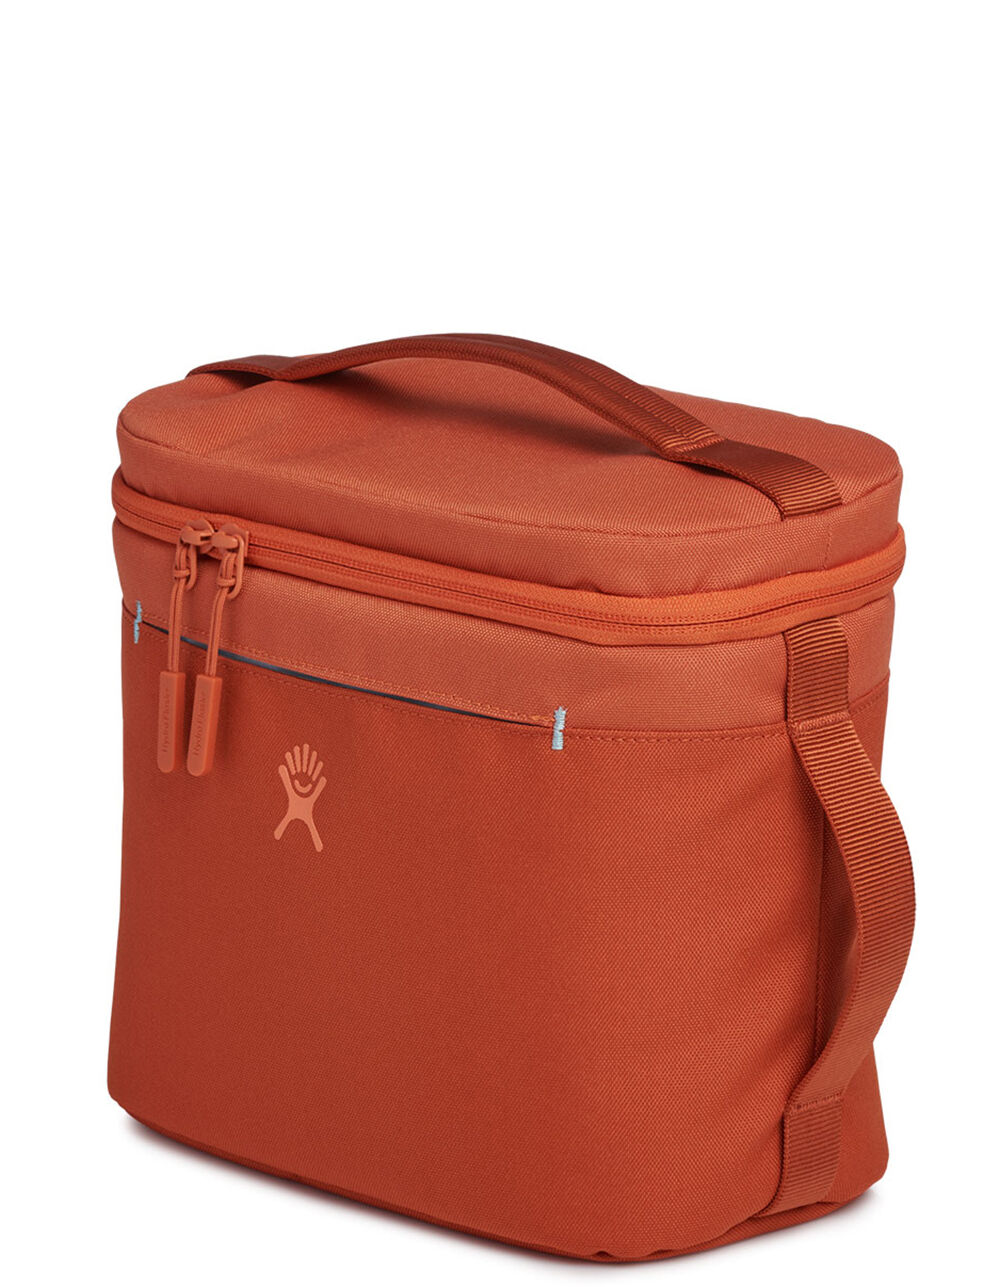 HYDROFLASK Chili 5L Lunch Bag - CHILI | Tillys